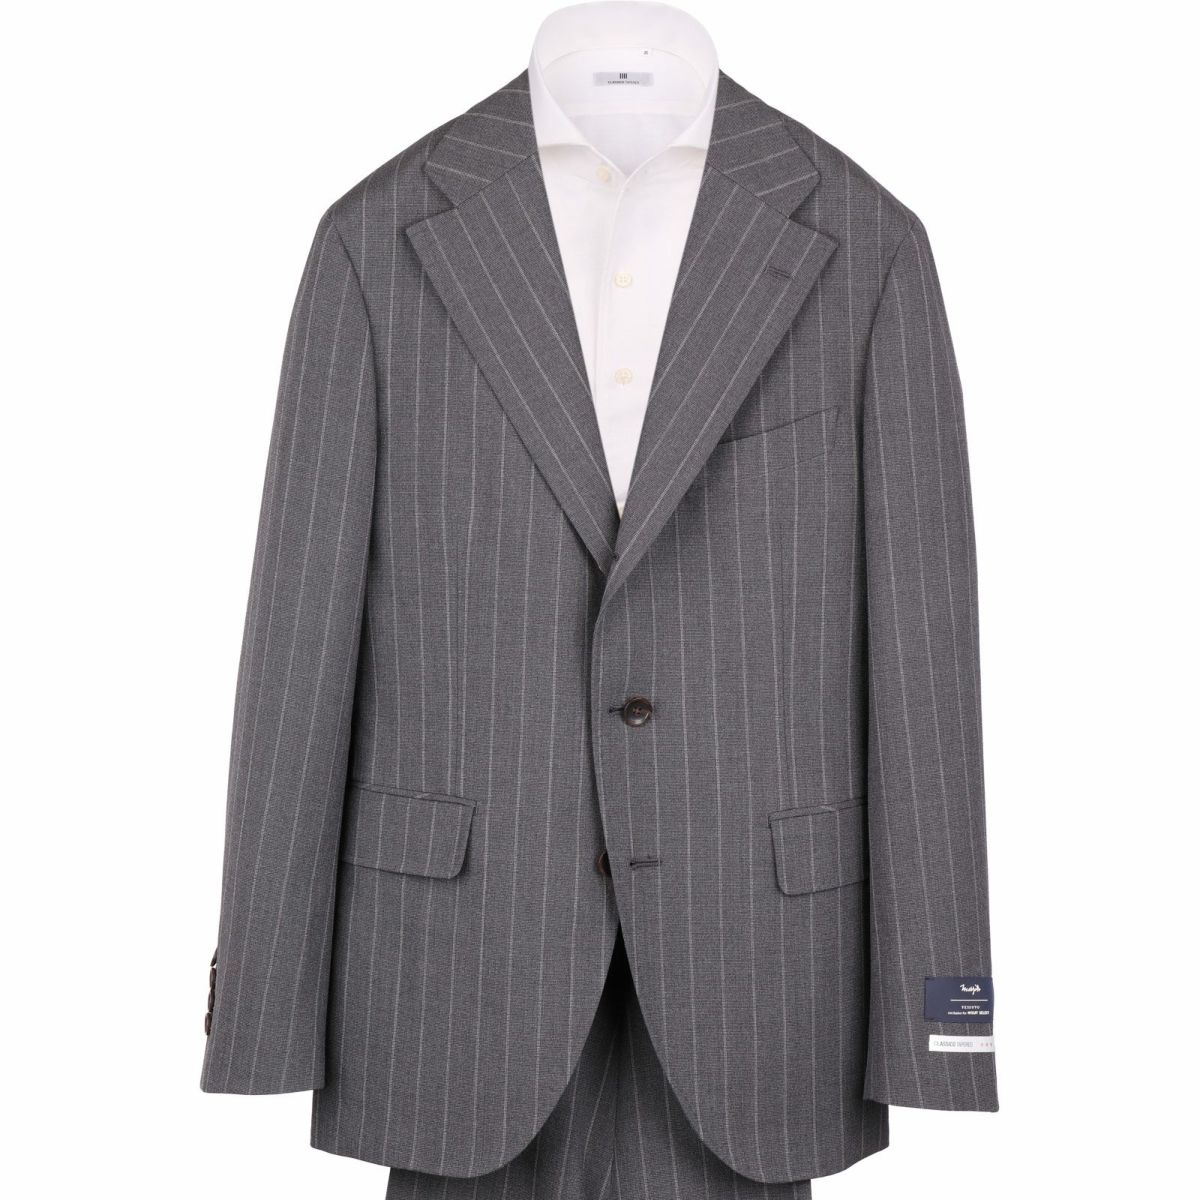 SUIT SELECT Marzotto スーツ セットアップ チェック Y4 - セットアップ